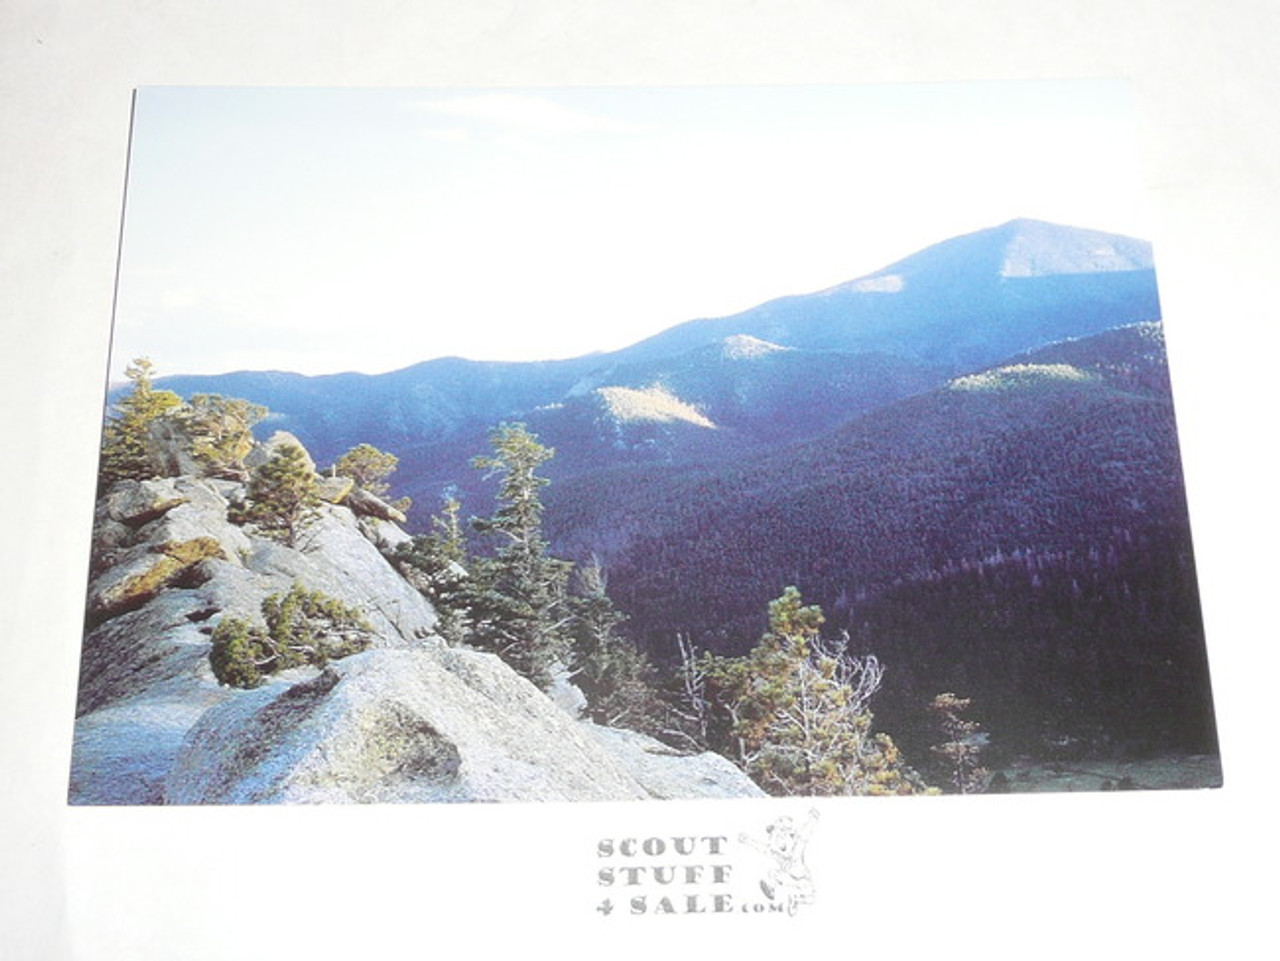 Philmont Scout Ranch Post card, Upper Tooth Ridge